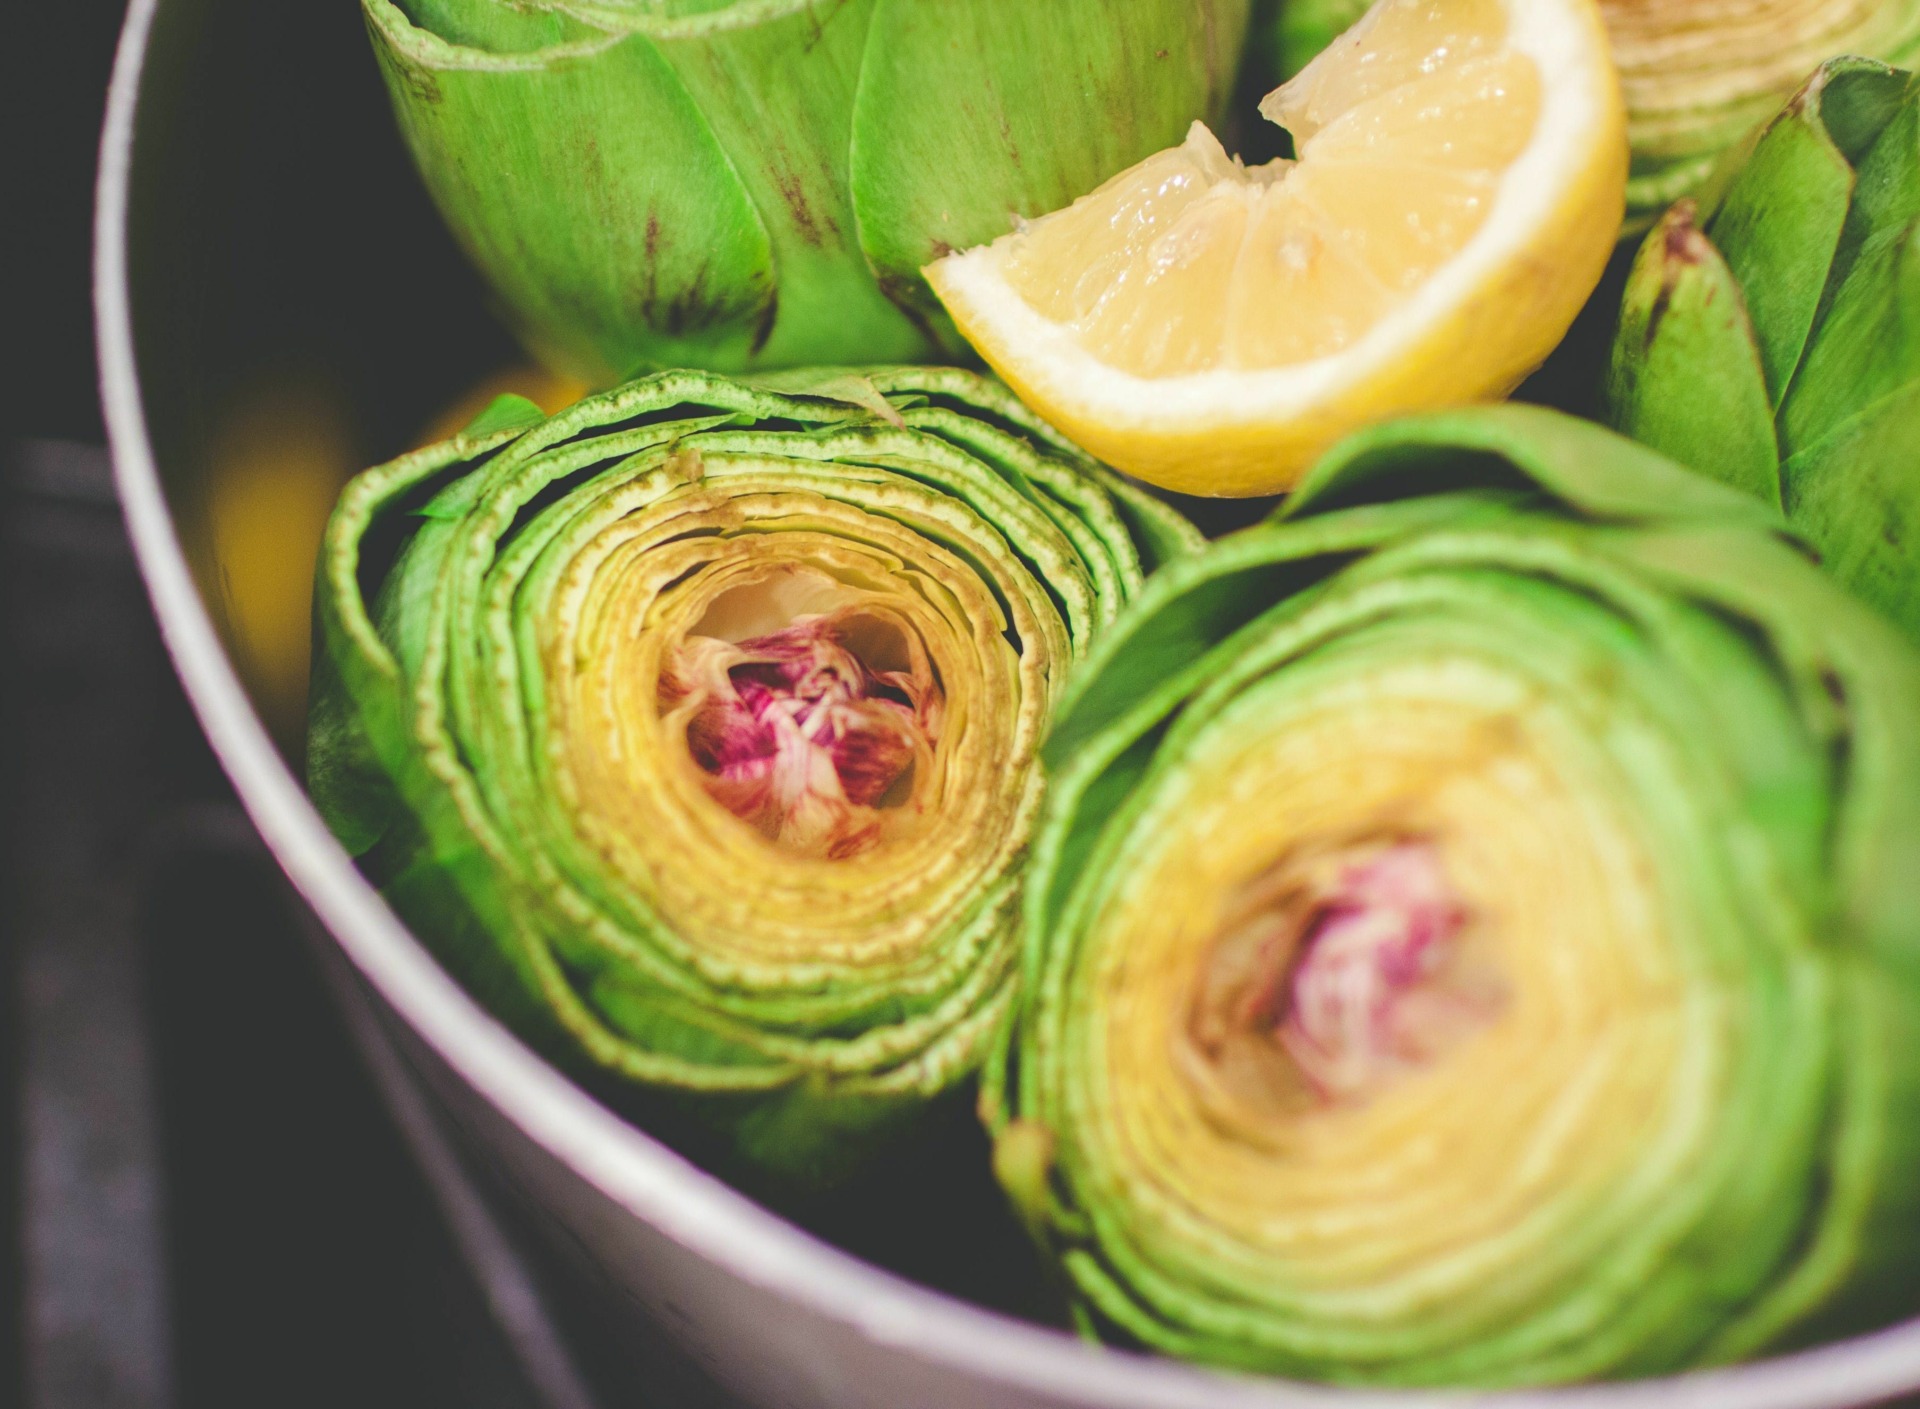 diy_recipe_cannabis_infused_stuffed_artichokes_made_with_love_33a710a930